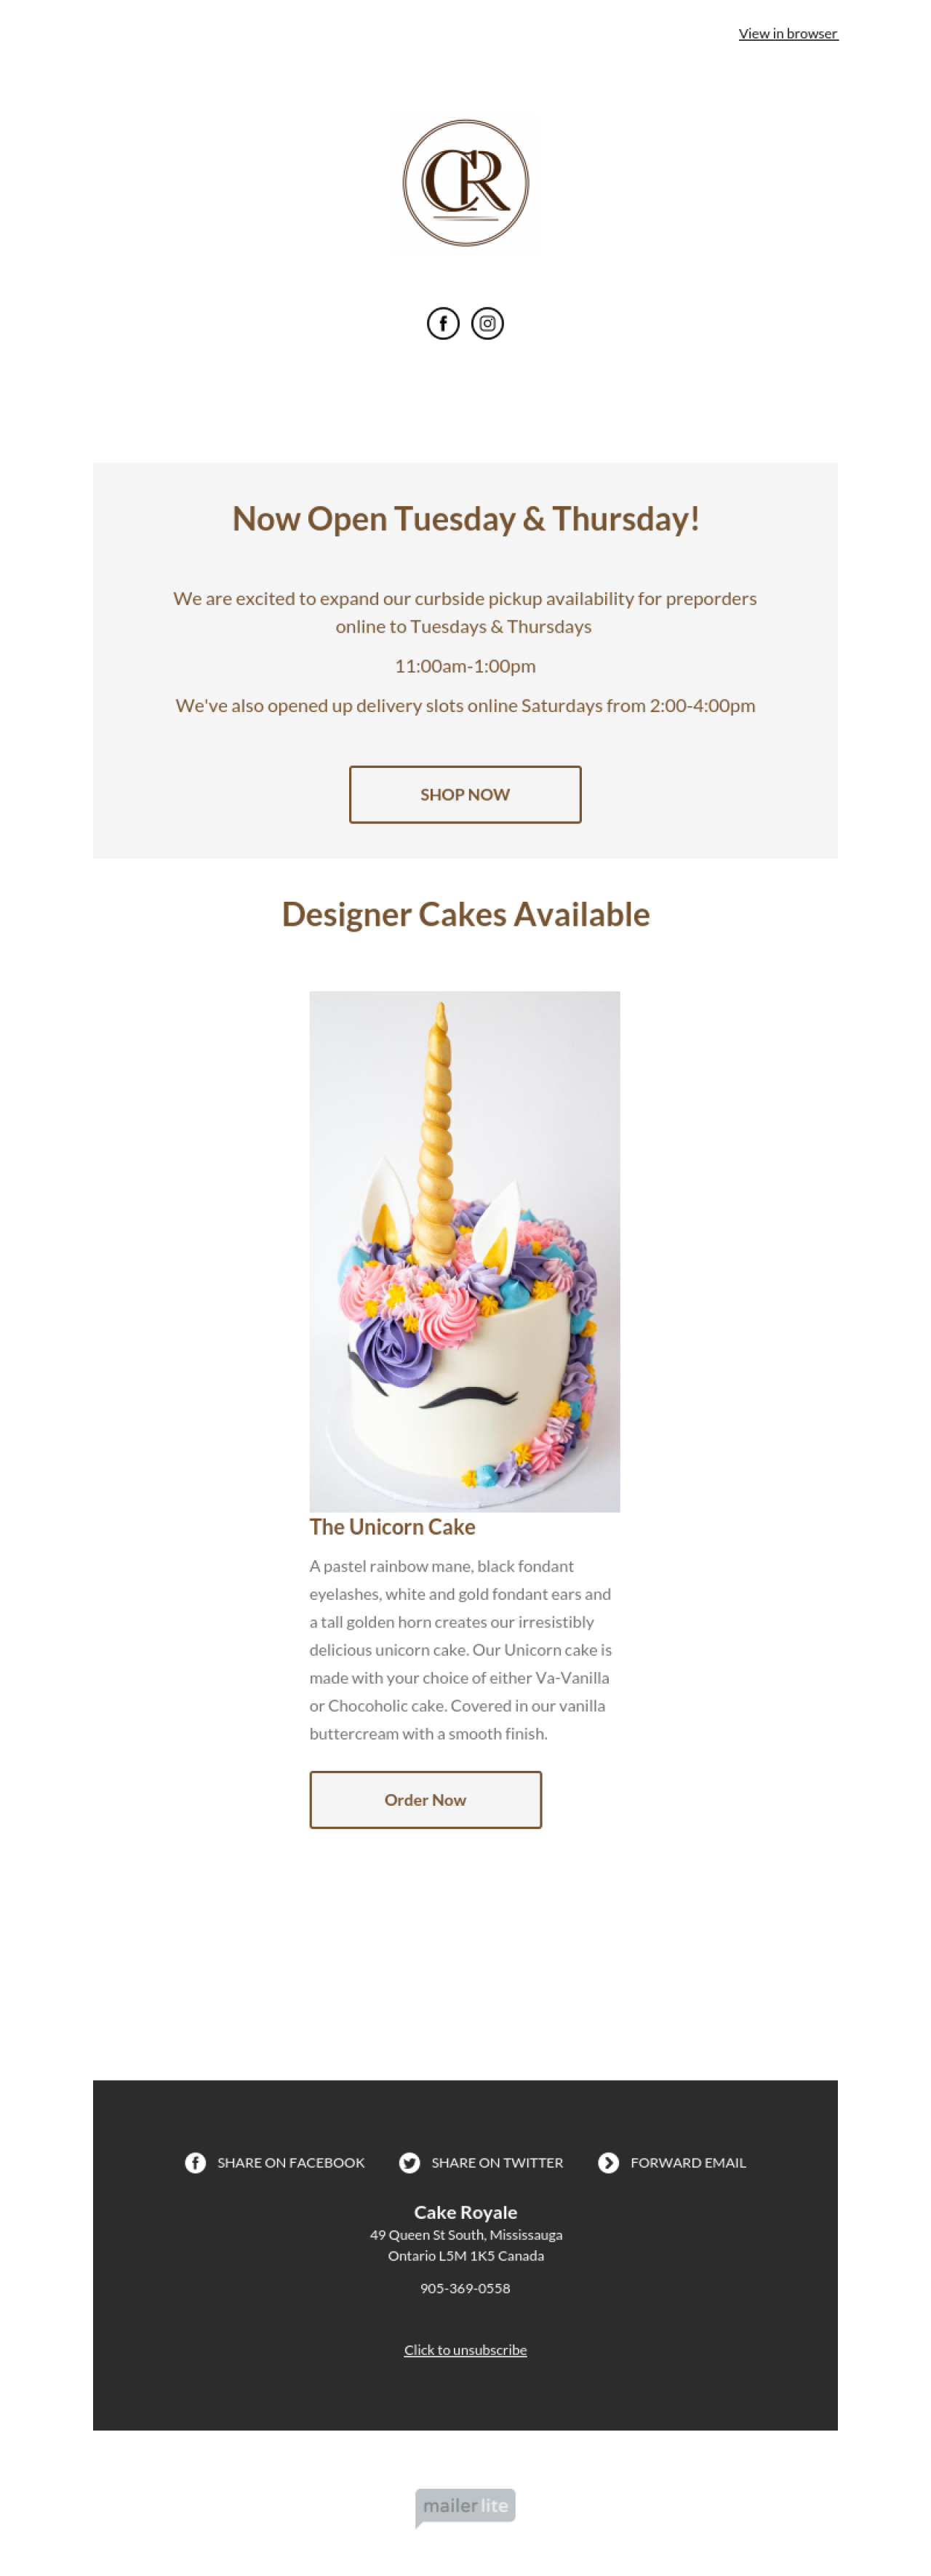 Cake Royale example - Made with MailerLite